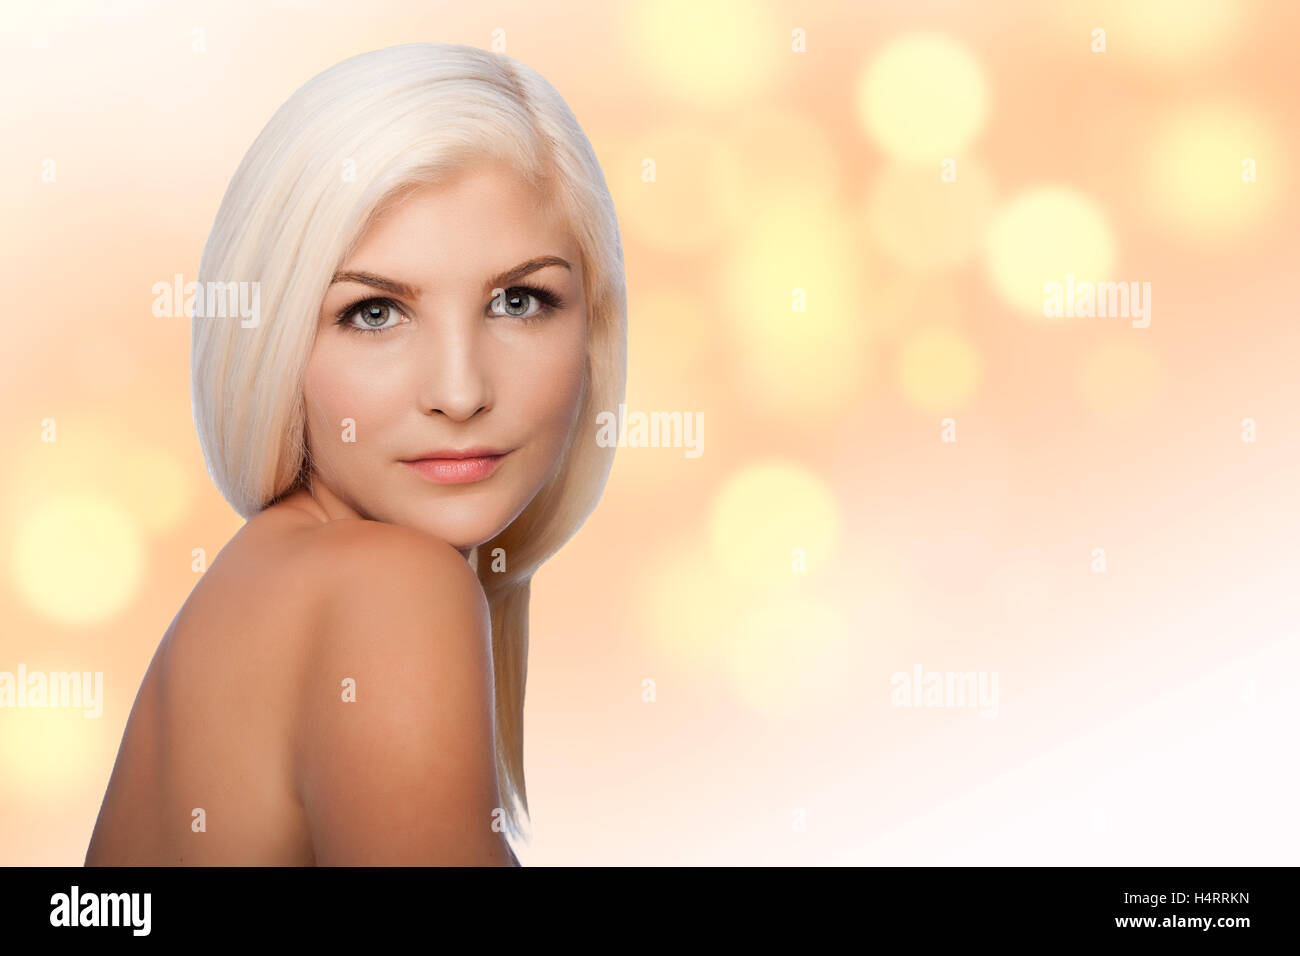 Beautiful face of young woman for Aesthetics facial skincare concept looking over shoulder, on blurred lights background. Stock Photo